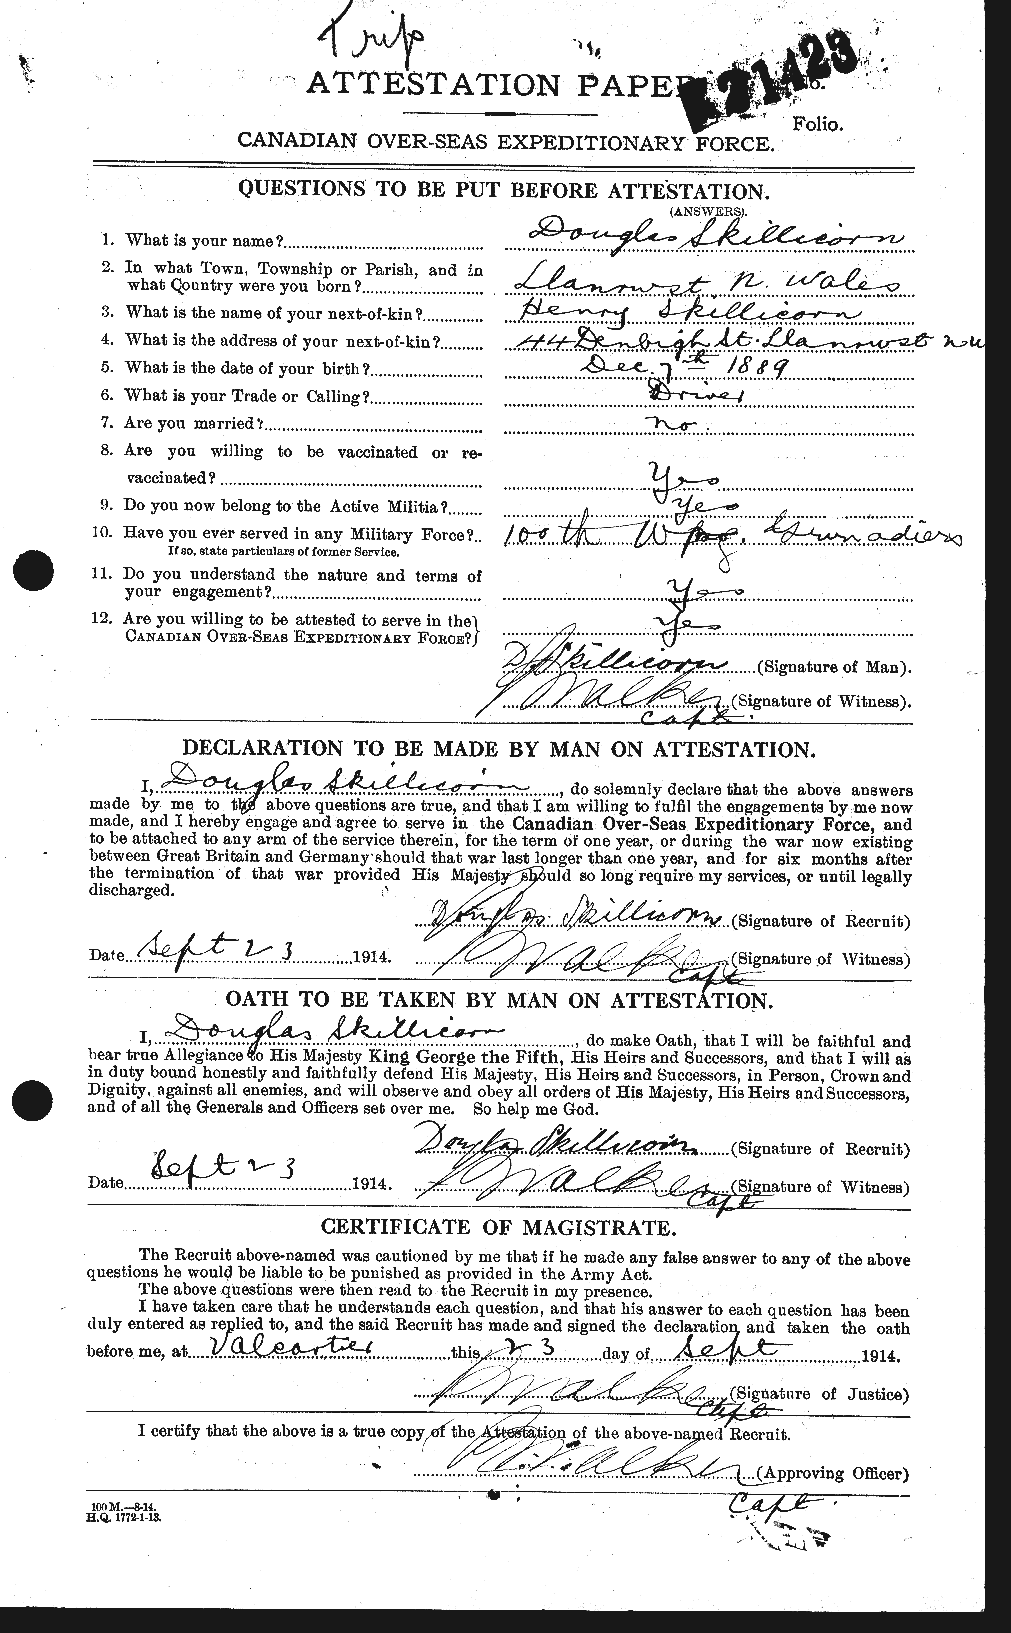 Personnel Records of the First World War - CEF 098996a